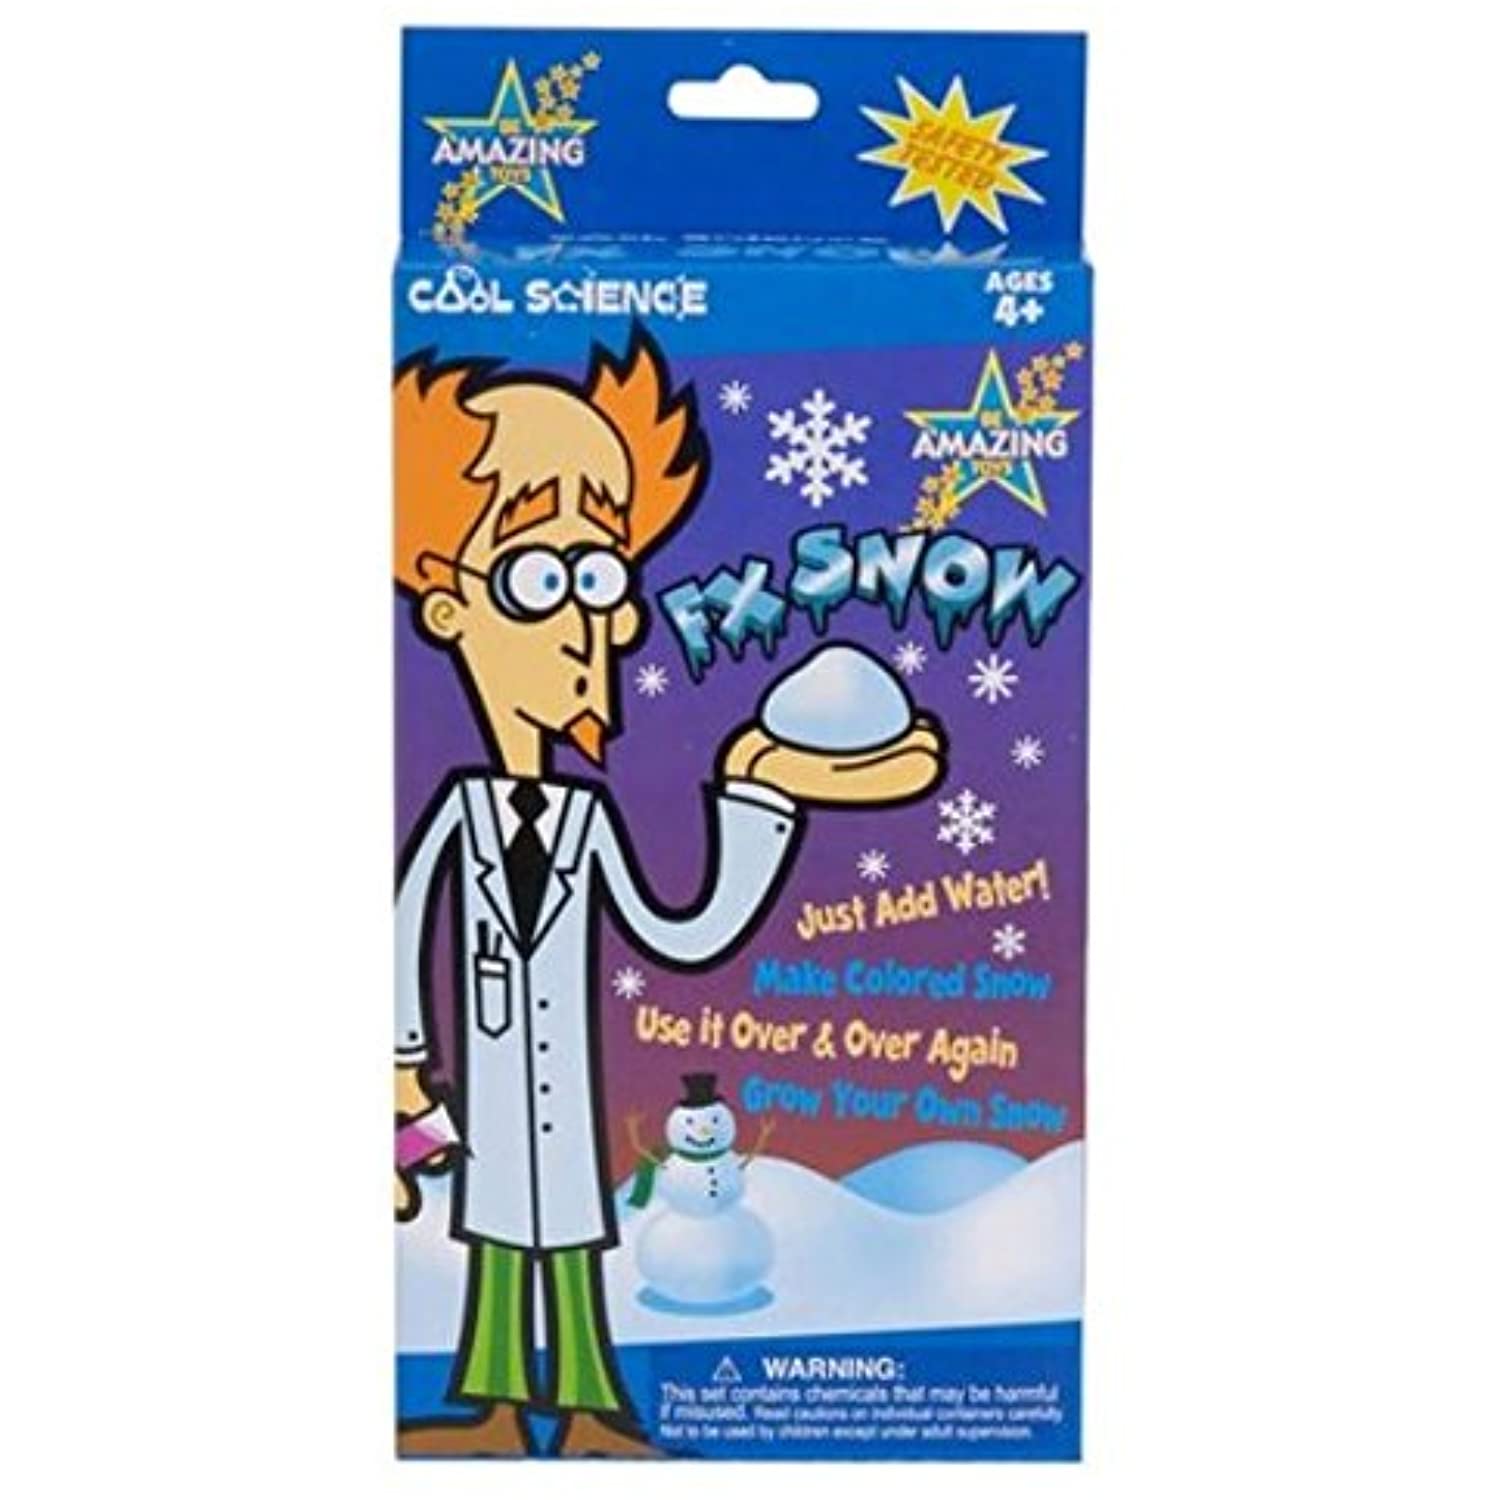 Be Amazing Toys F/x Snow (Pack of 2)